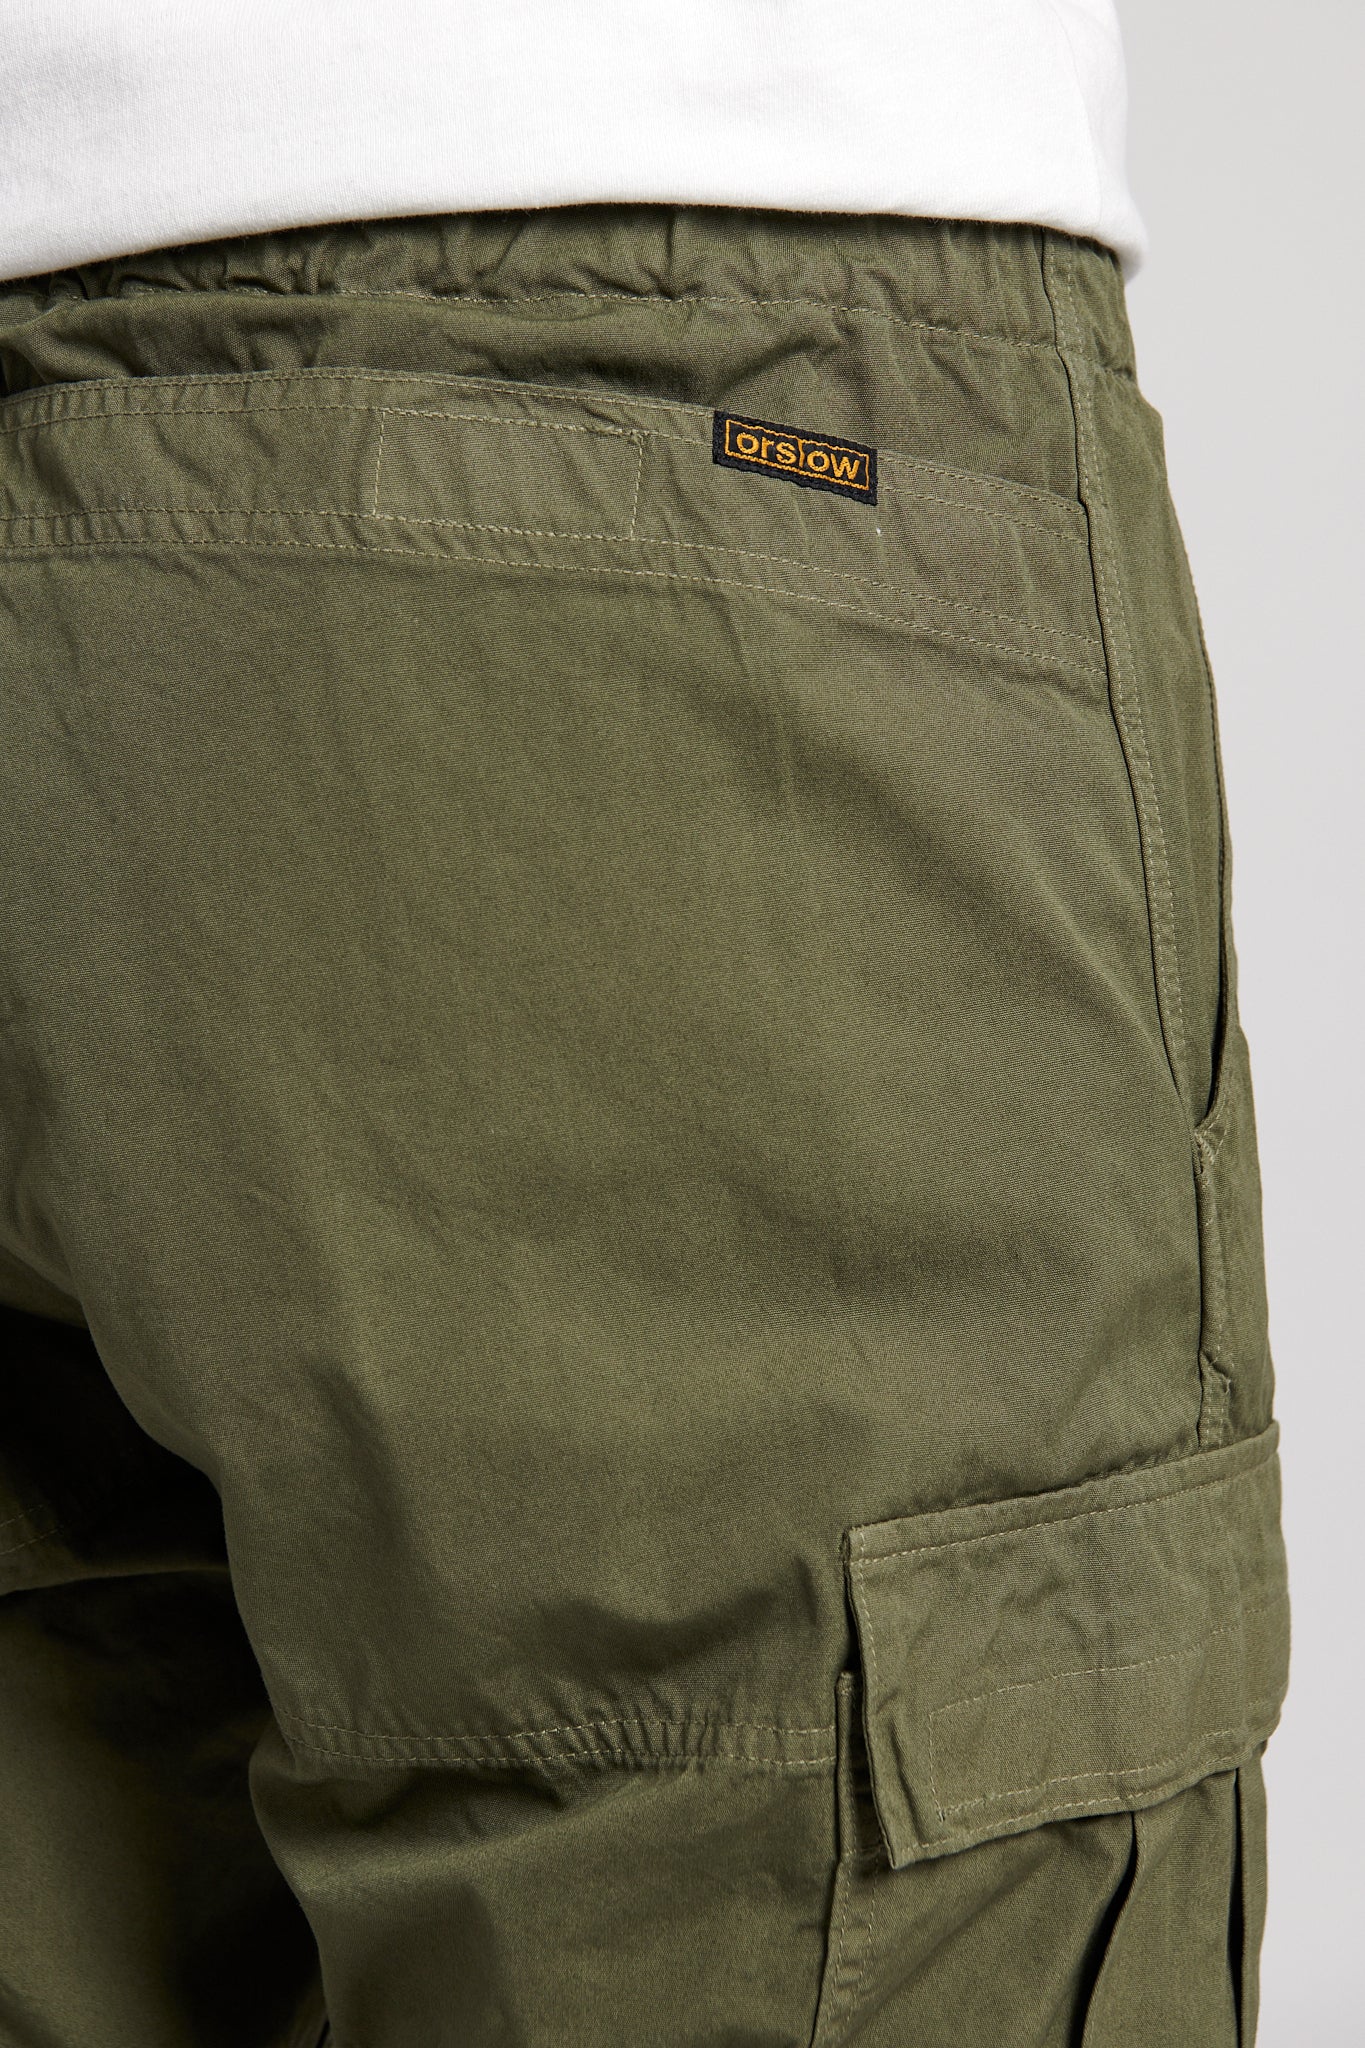 Easy Cargo Pants - Army Green